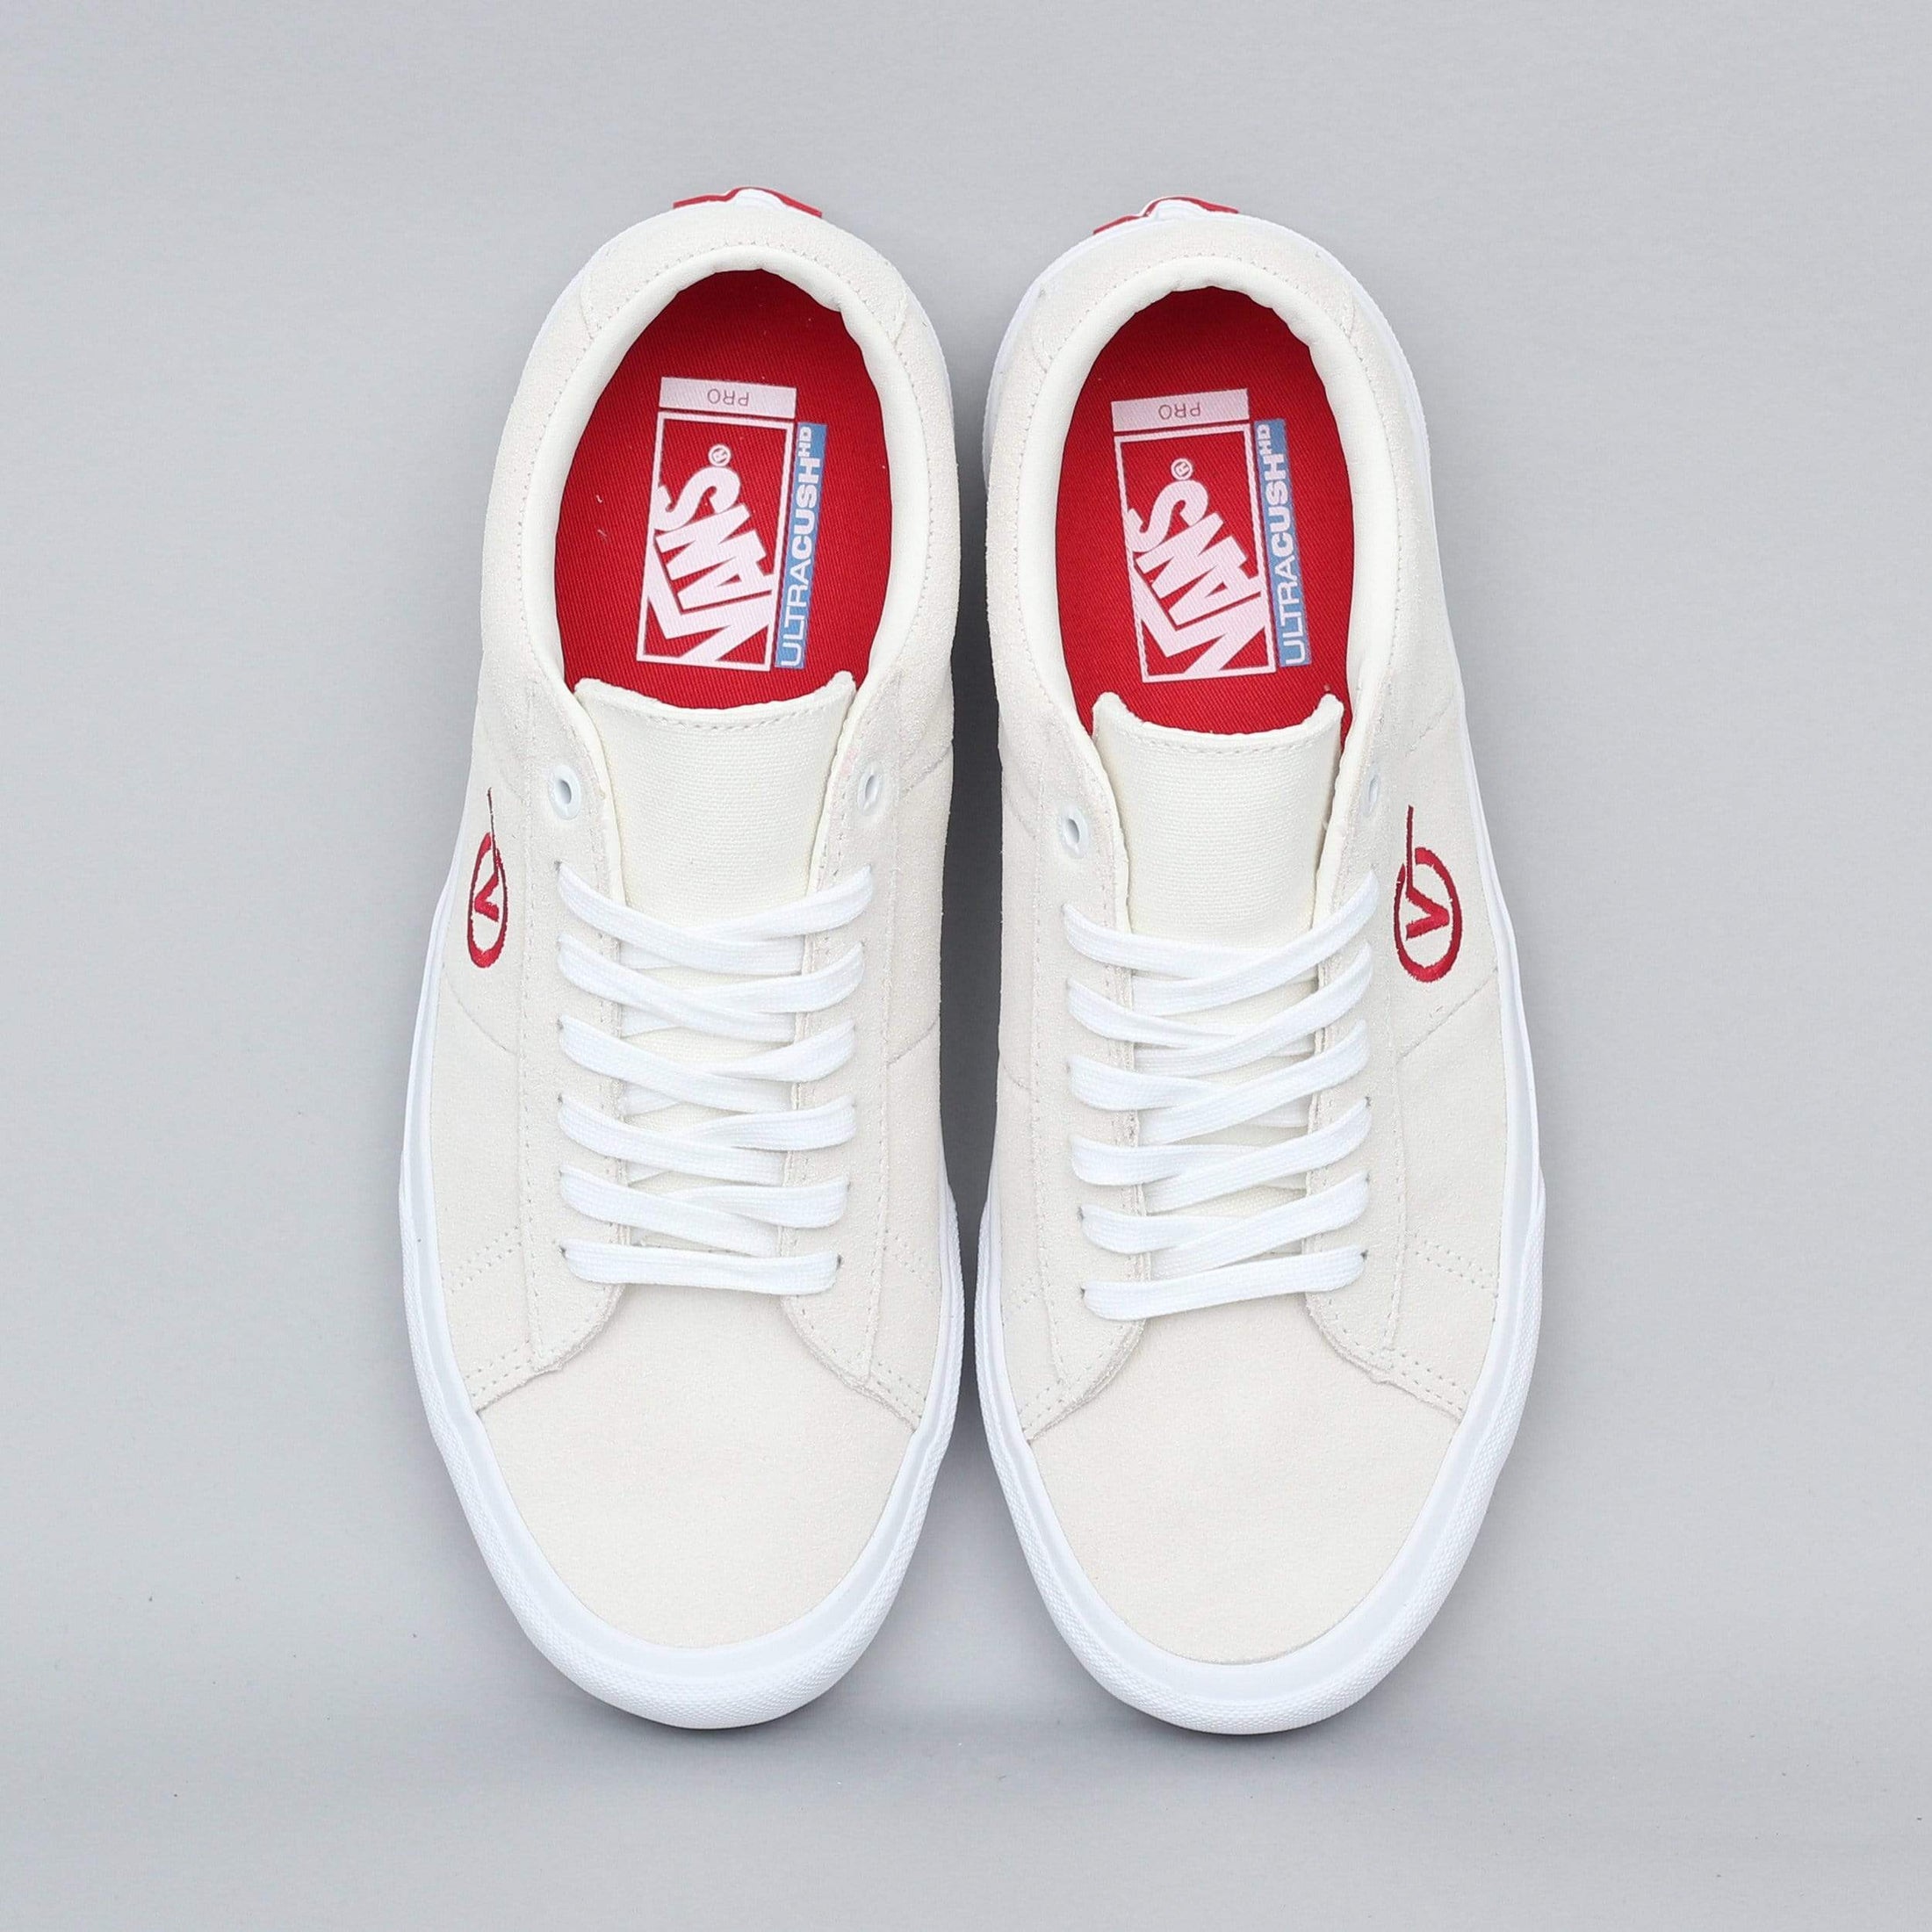 Vans Saddle Sid Pro Shoes Marshmallow / Racing Red